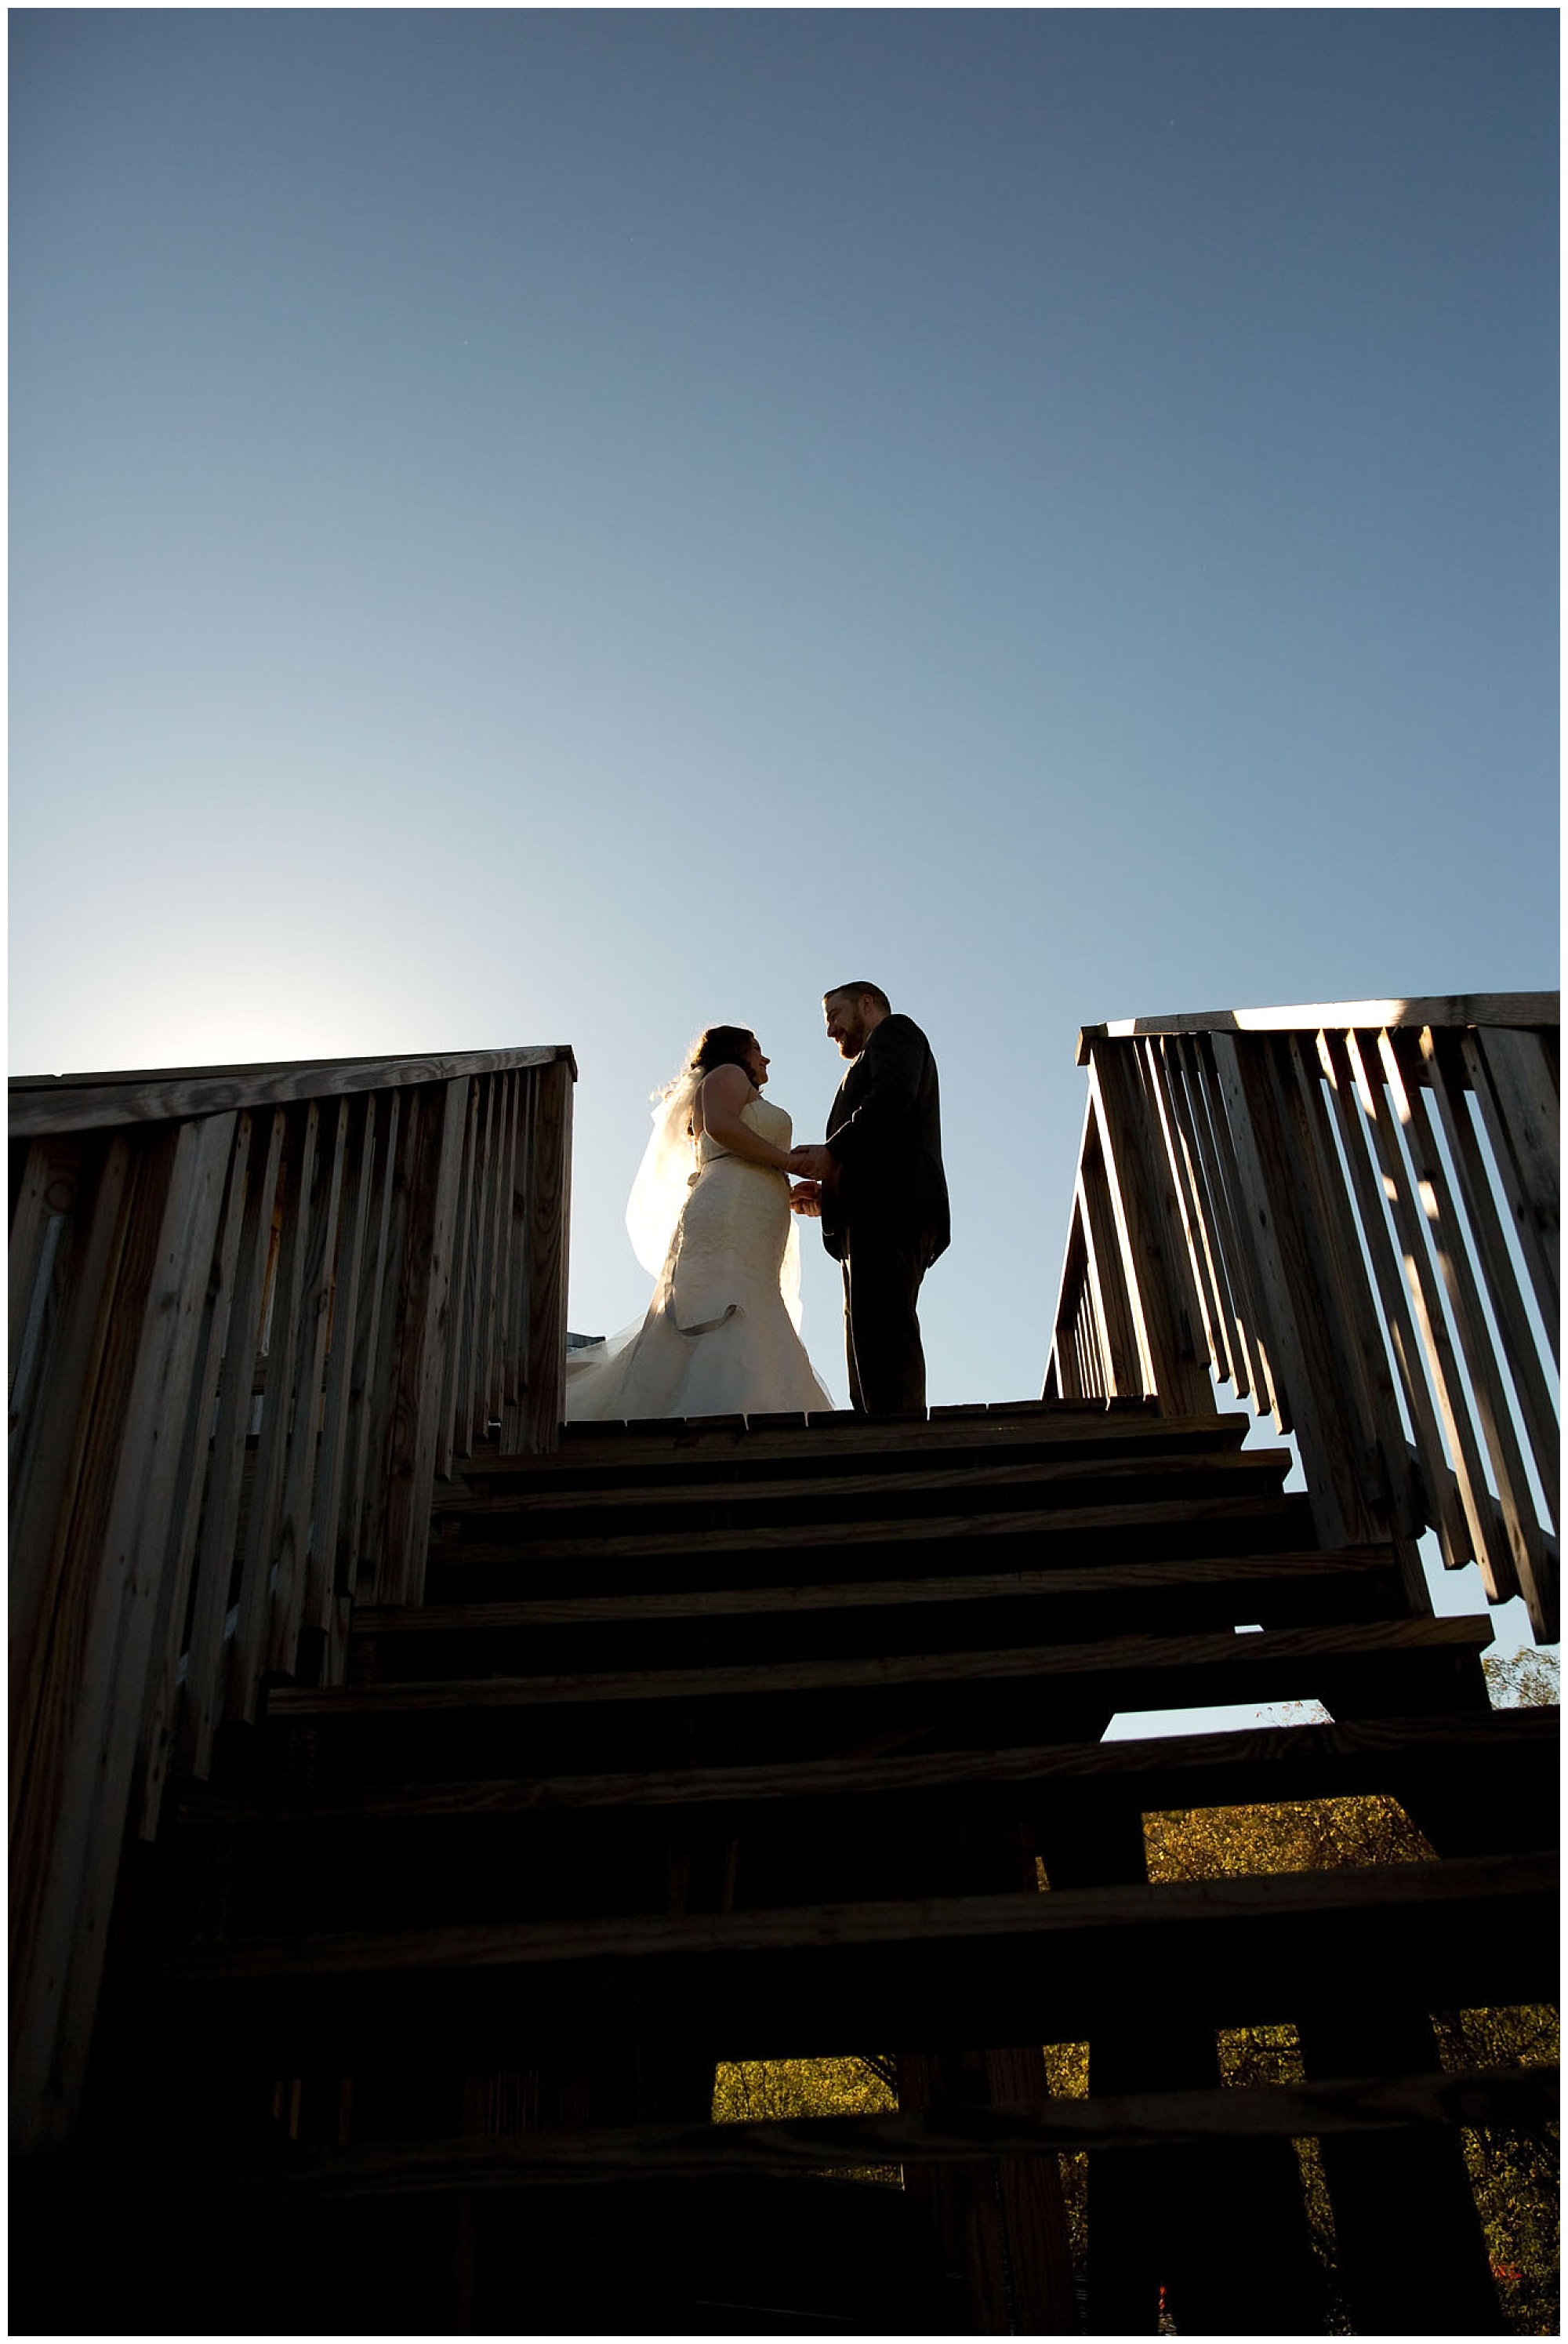 A silhouette photo of a bride and groom atop a deck stairway